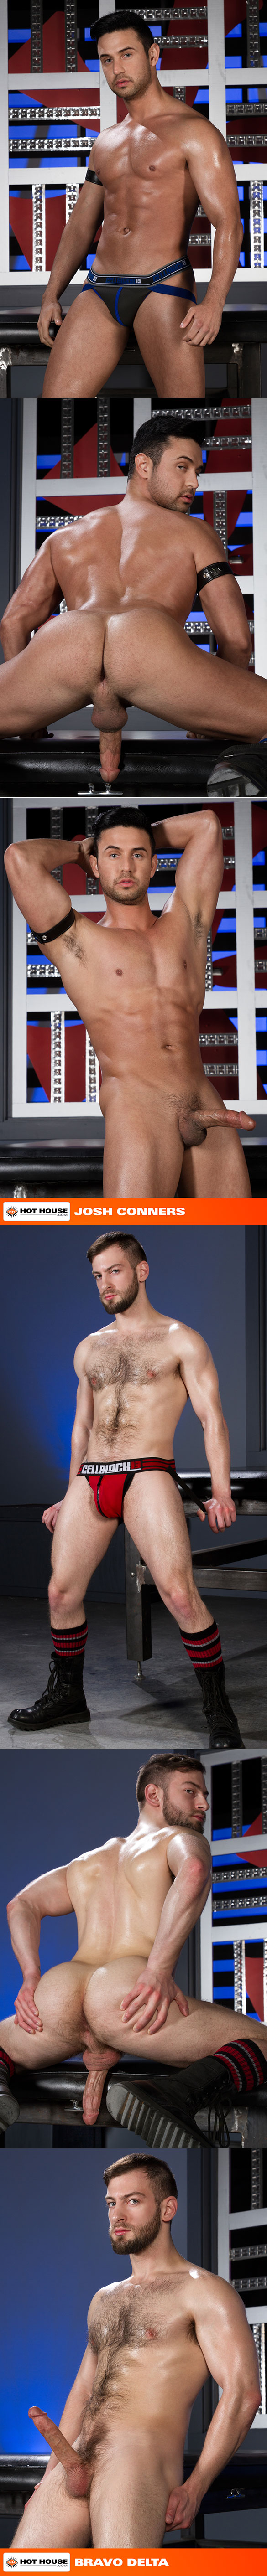 HotHouse: Bravo Delta pounds Josh Conners in "Ass Fiends"